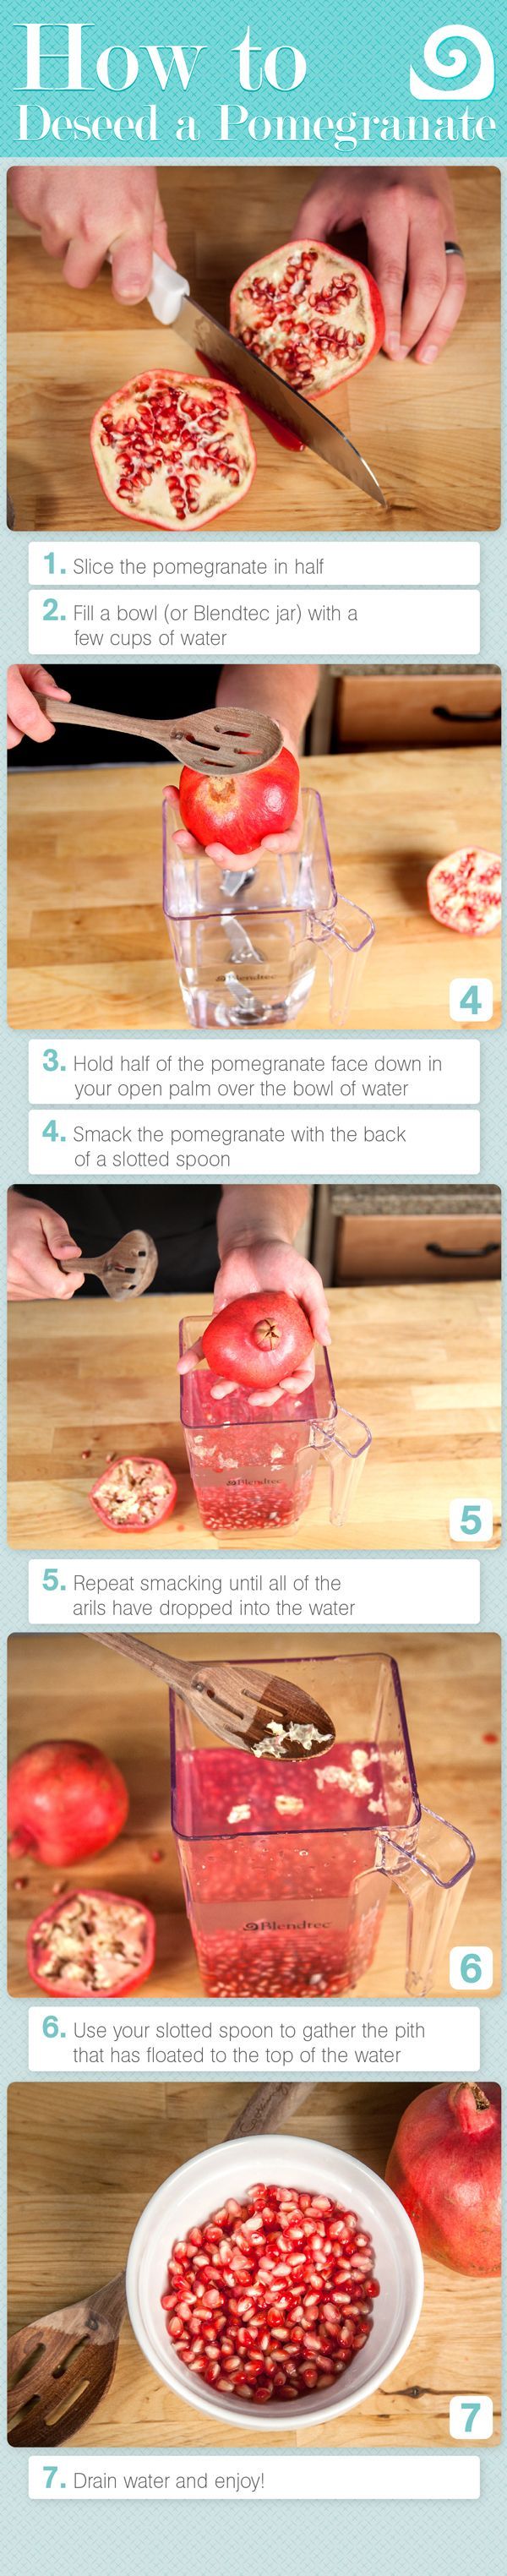 For tips and tricks     How to de-seed a pomegranate, the easy way!